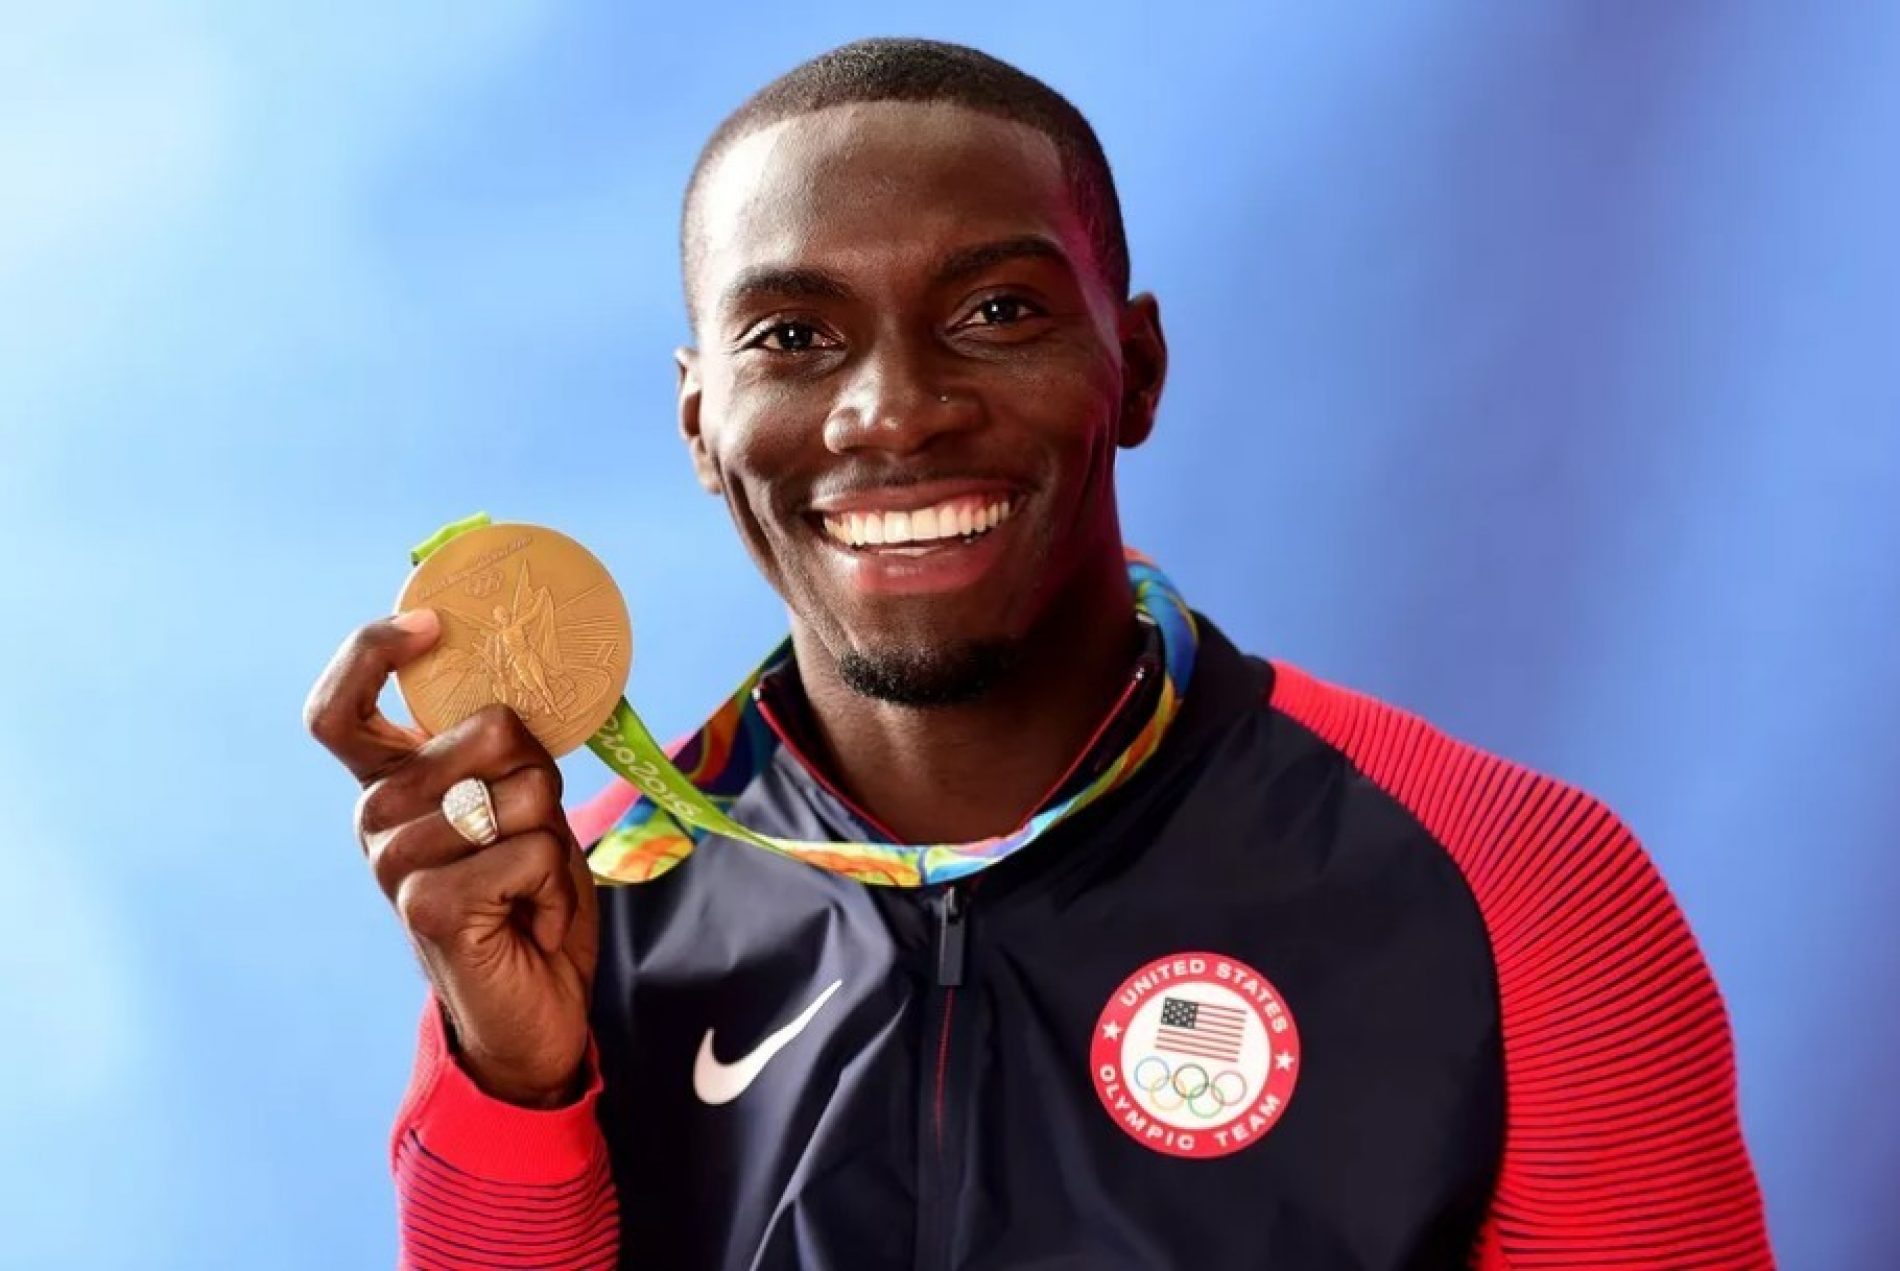 Olympic champion Kerron Clement comes out on National Coming Out Day